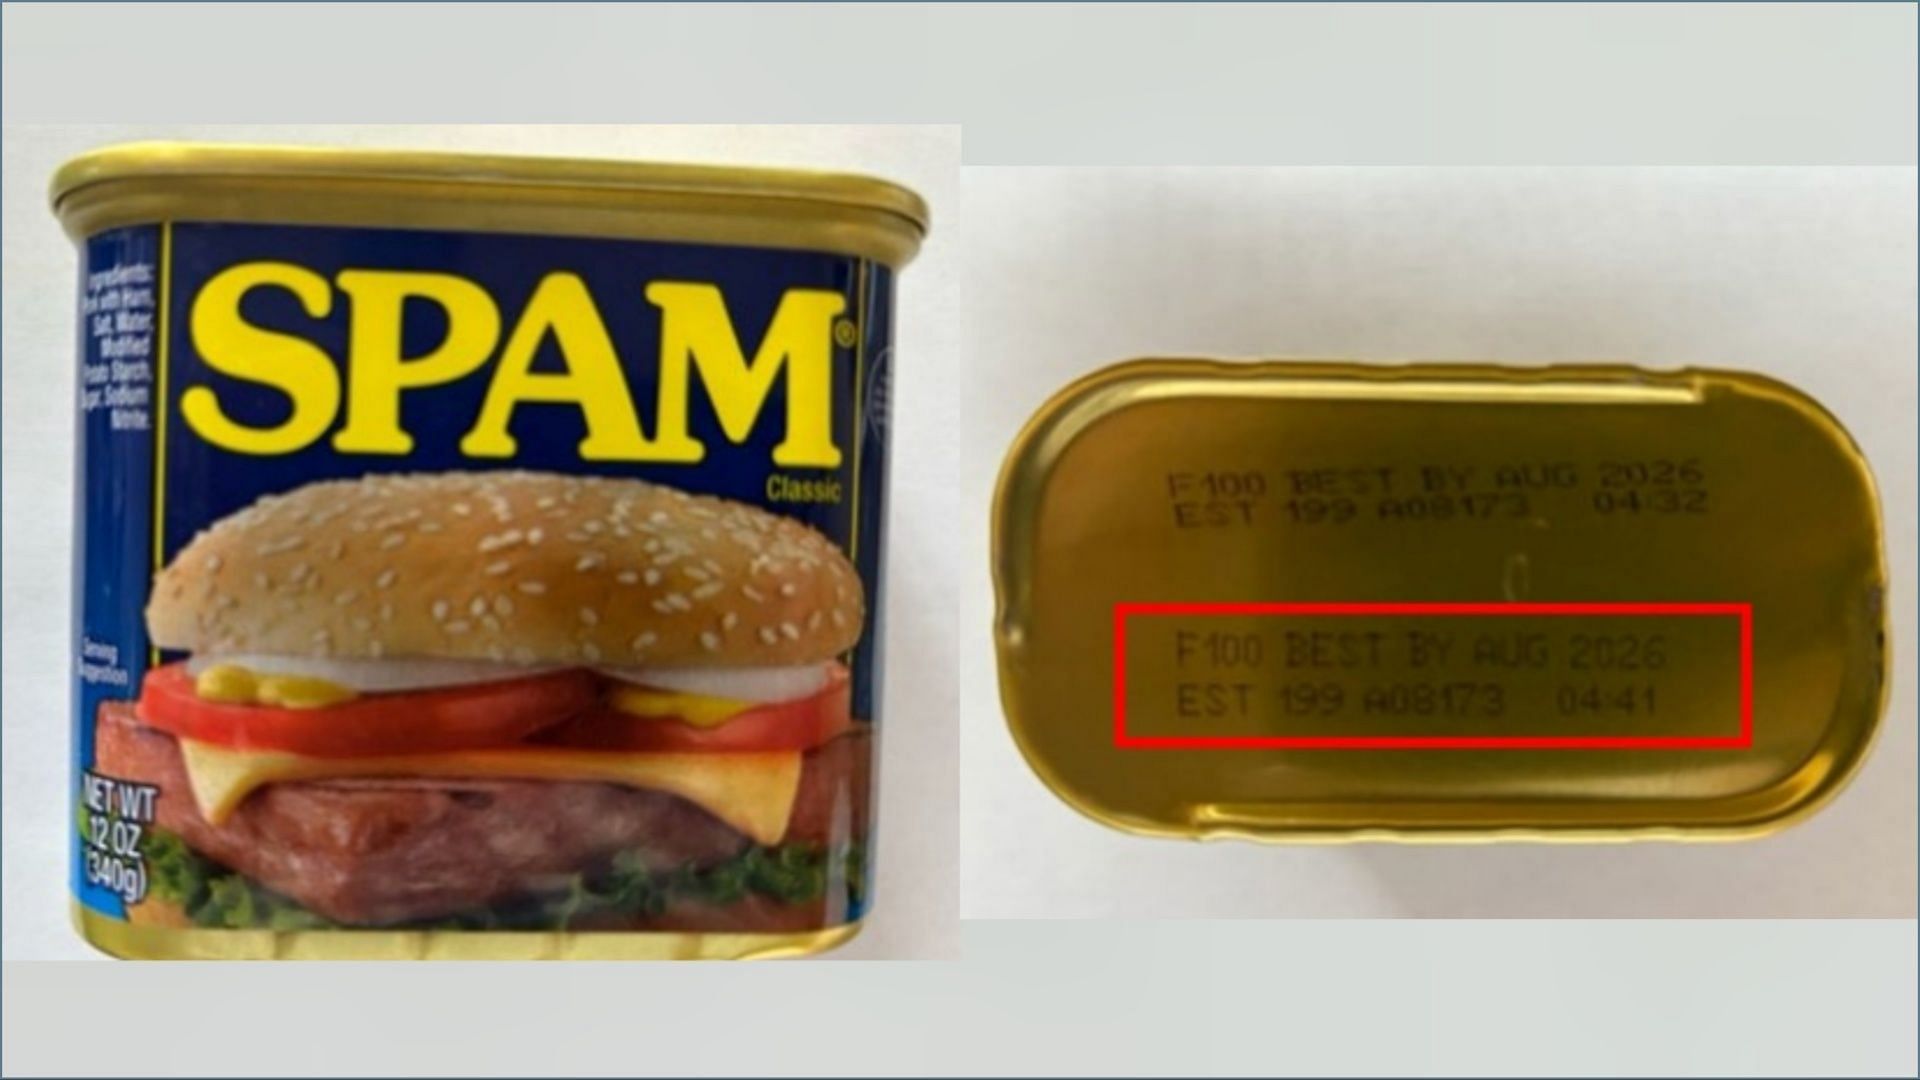 FSIS issued public health alert for Canned Meat products over under-processing concerns (Image via FSIS)